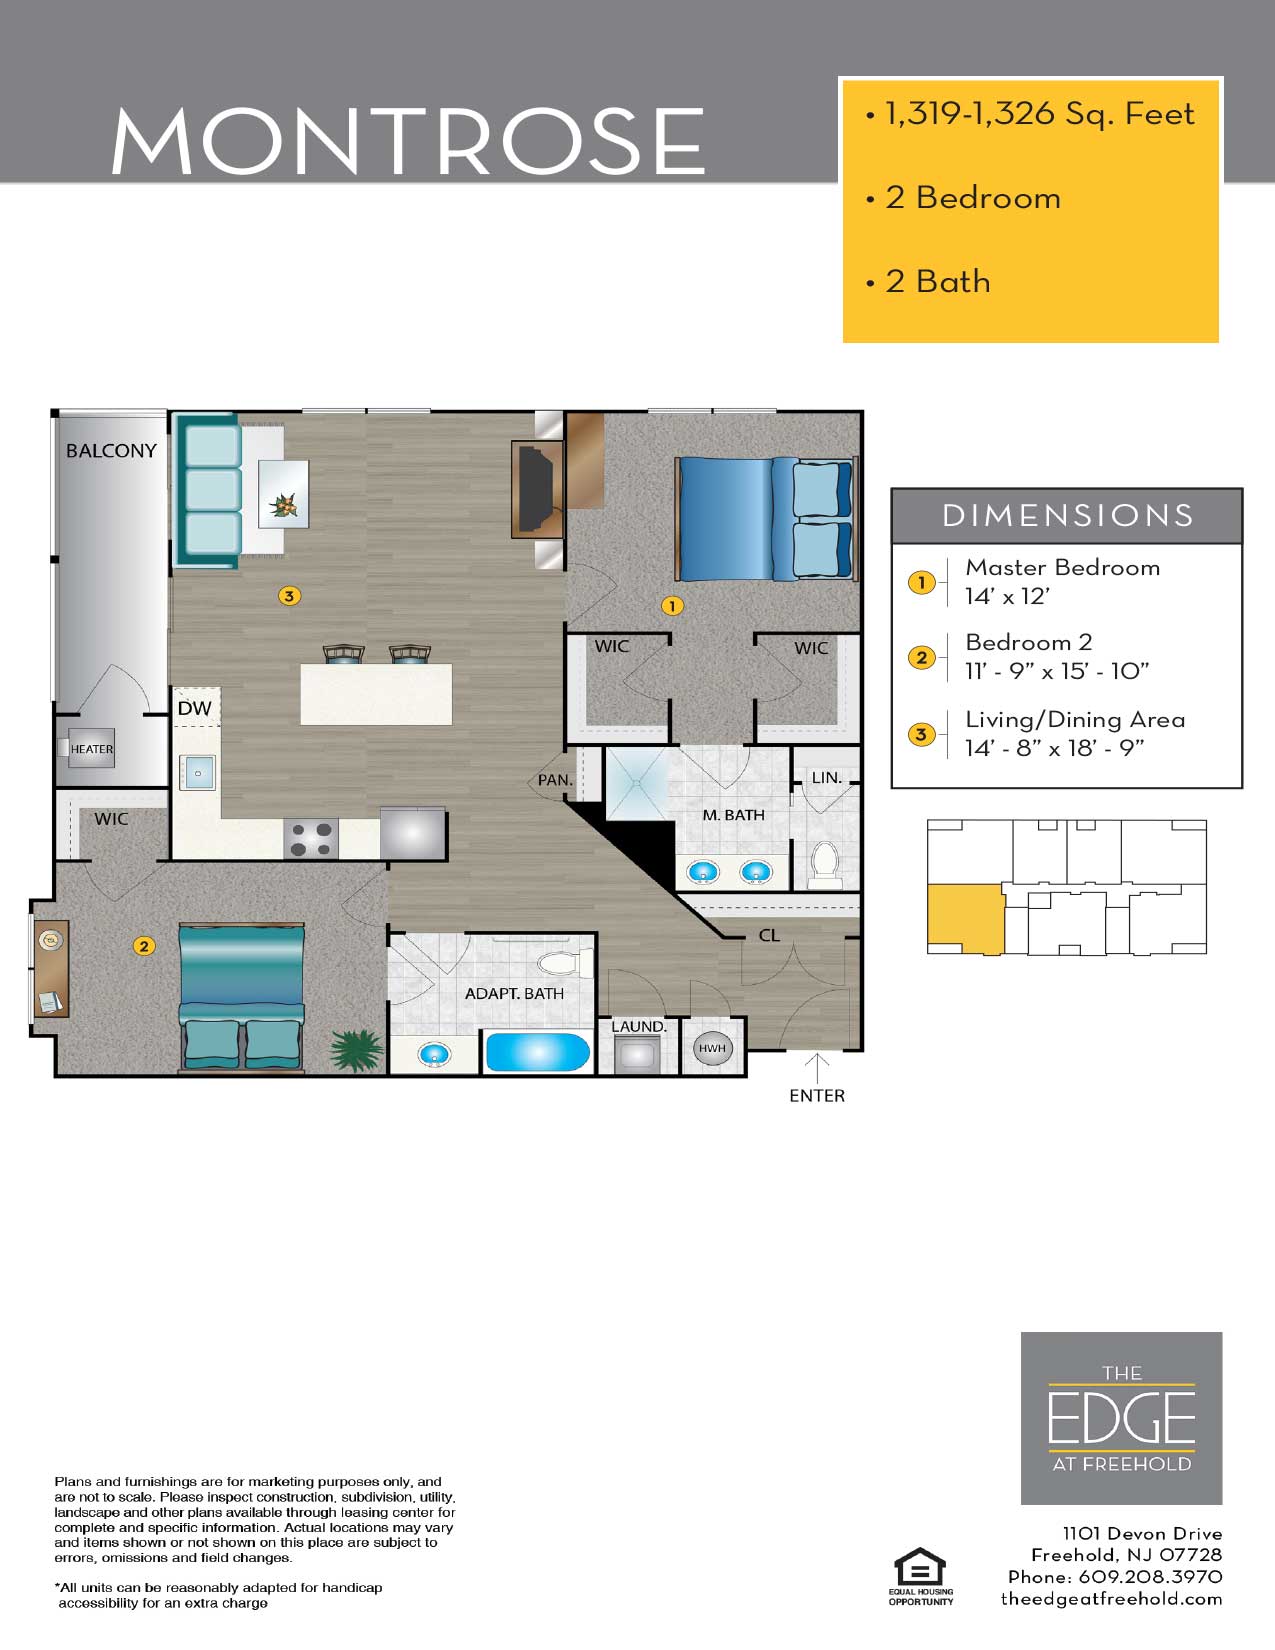 The Edge At Freehold Floor Plan Montrose